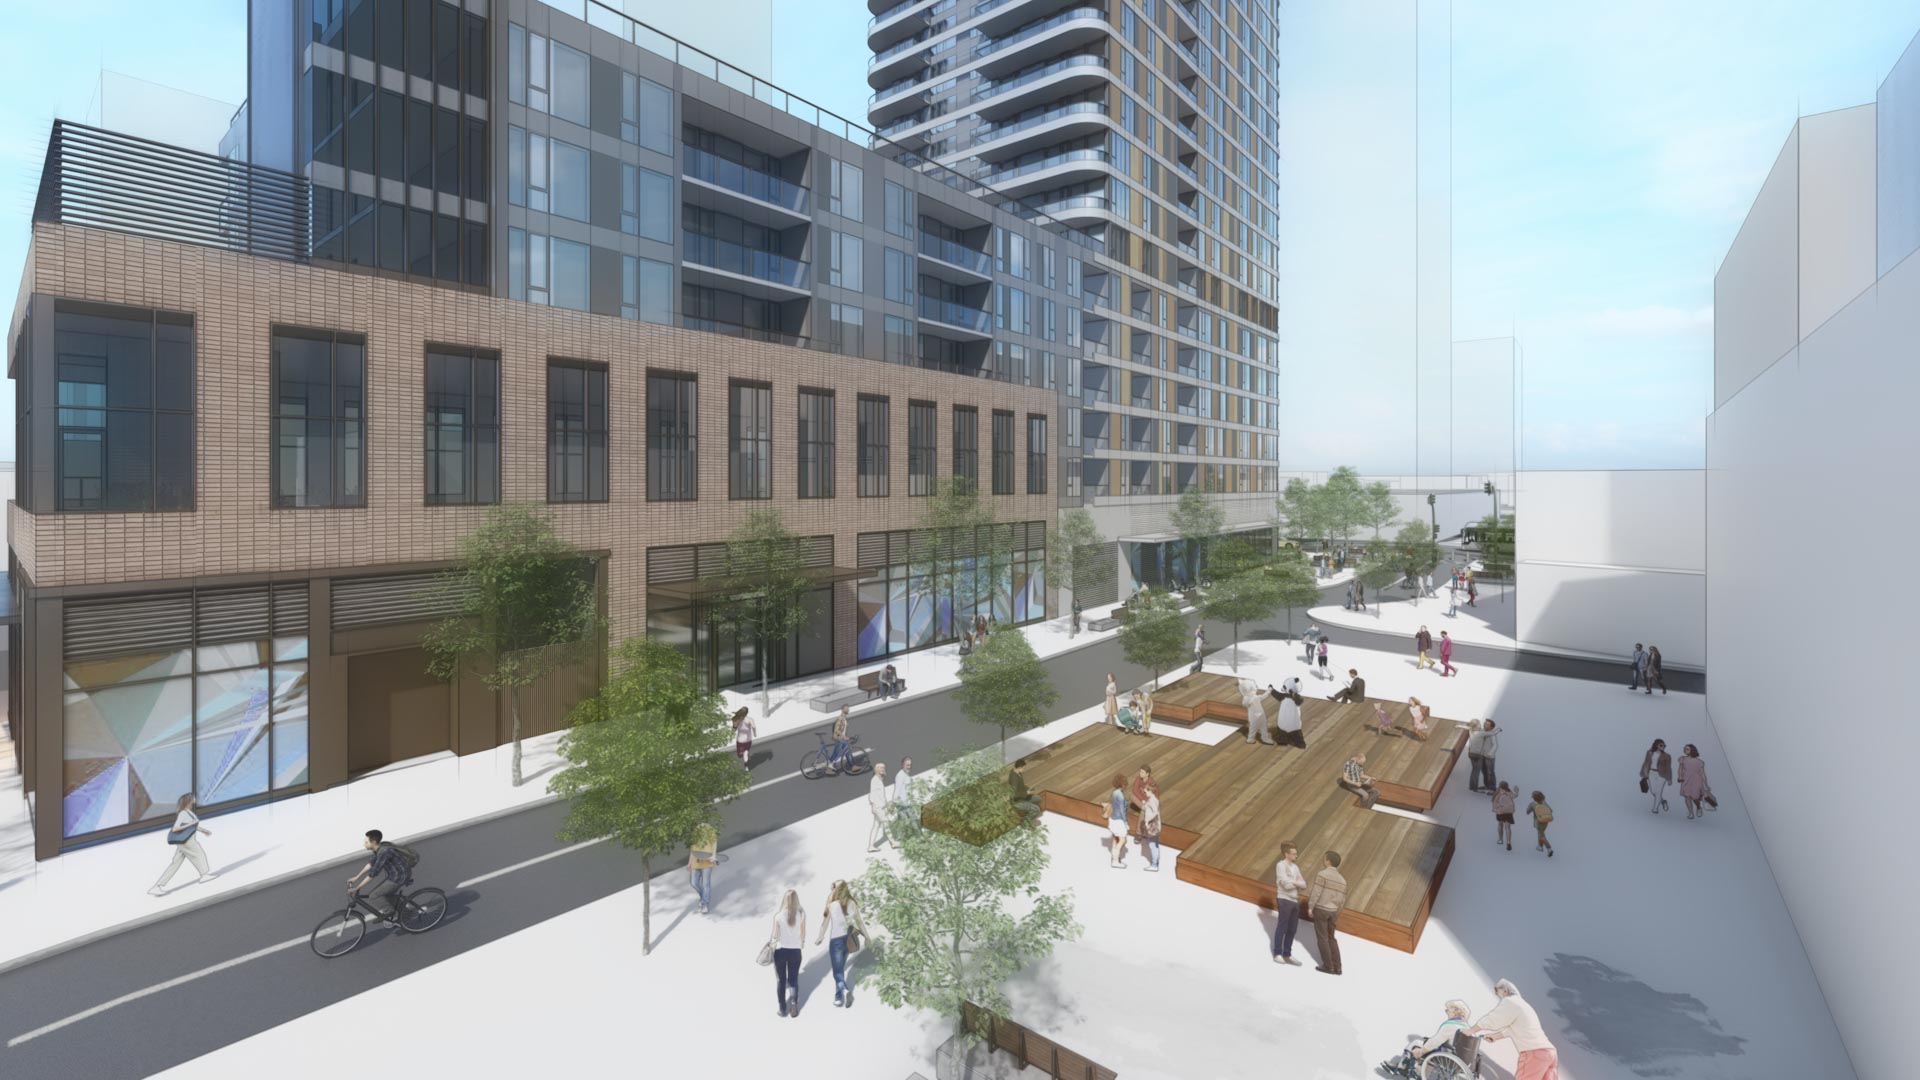 A rendering of the proposed Arbutus Station development showing the greenway